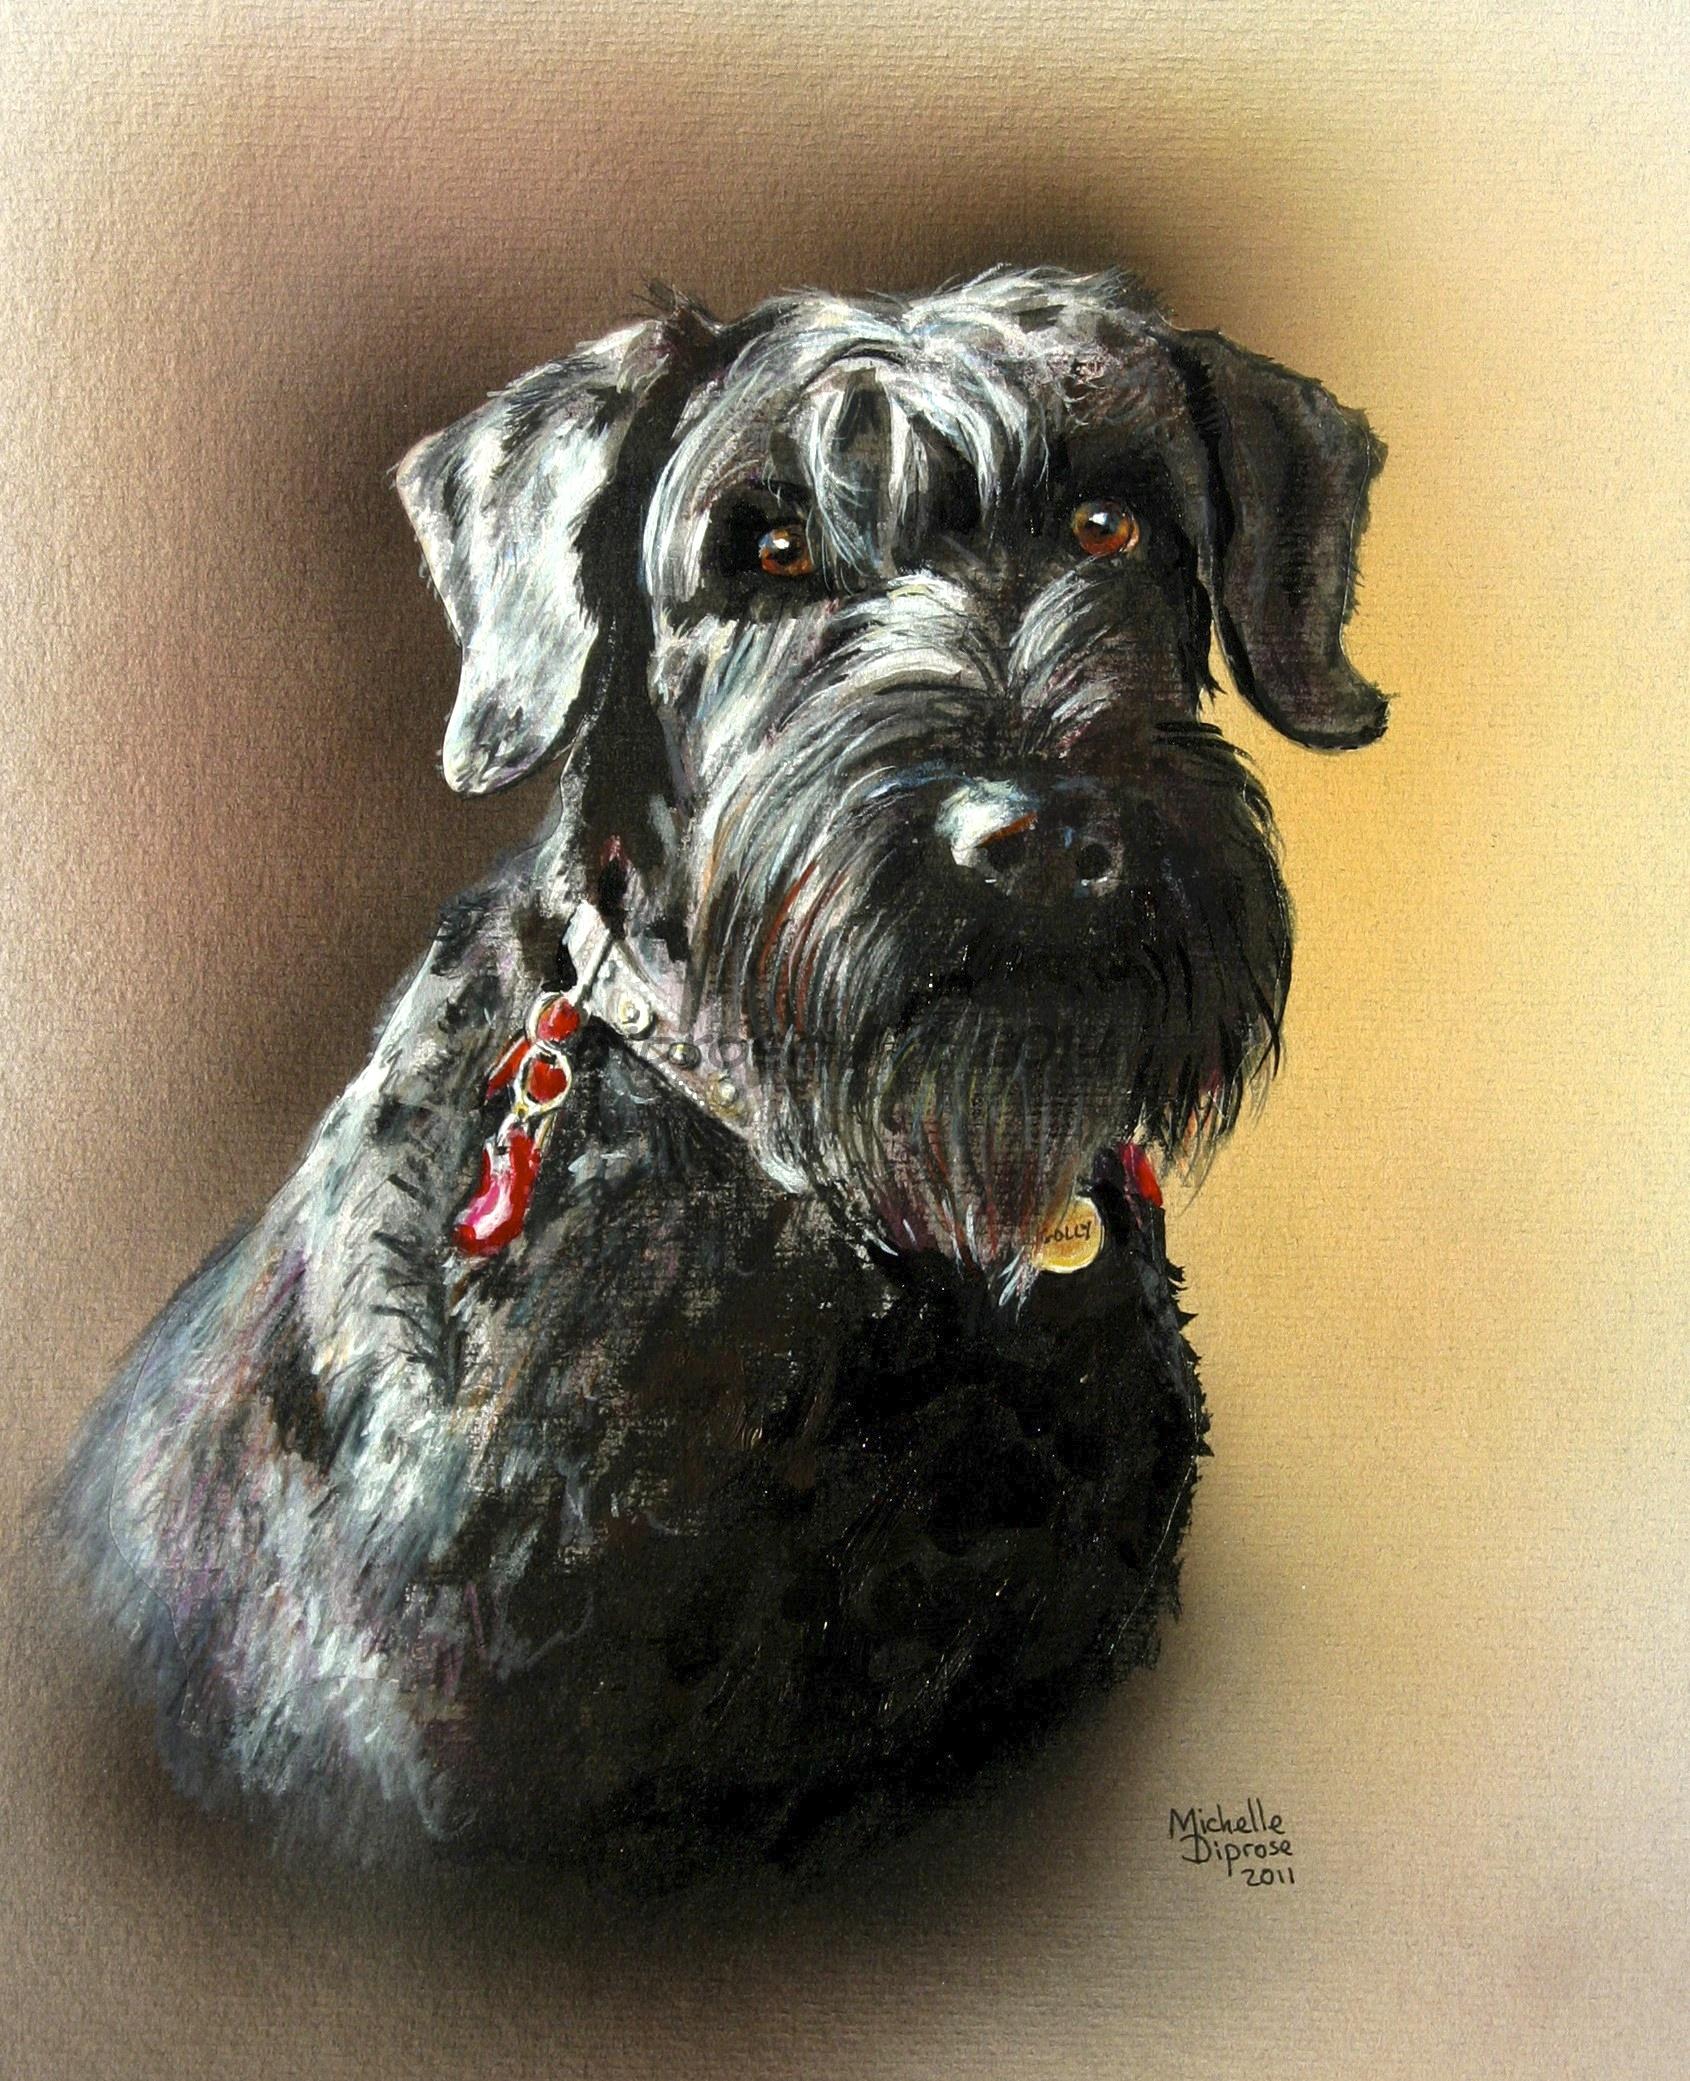 Acrylics on board - approx A4 - pet dog portrait - Golly is a real cutie and was quite a challenge being both black and very hairy - great eyebrows.